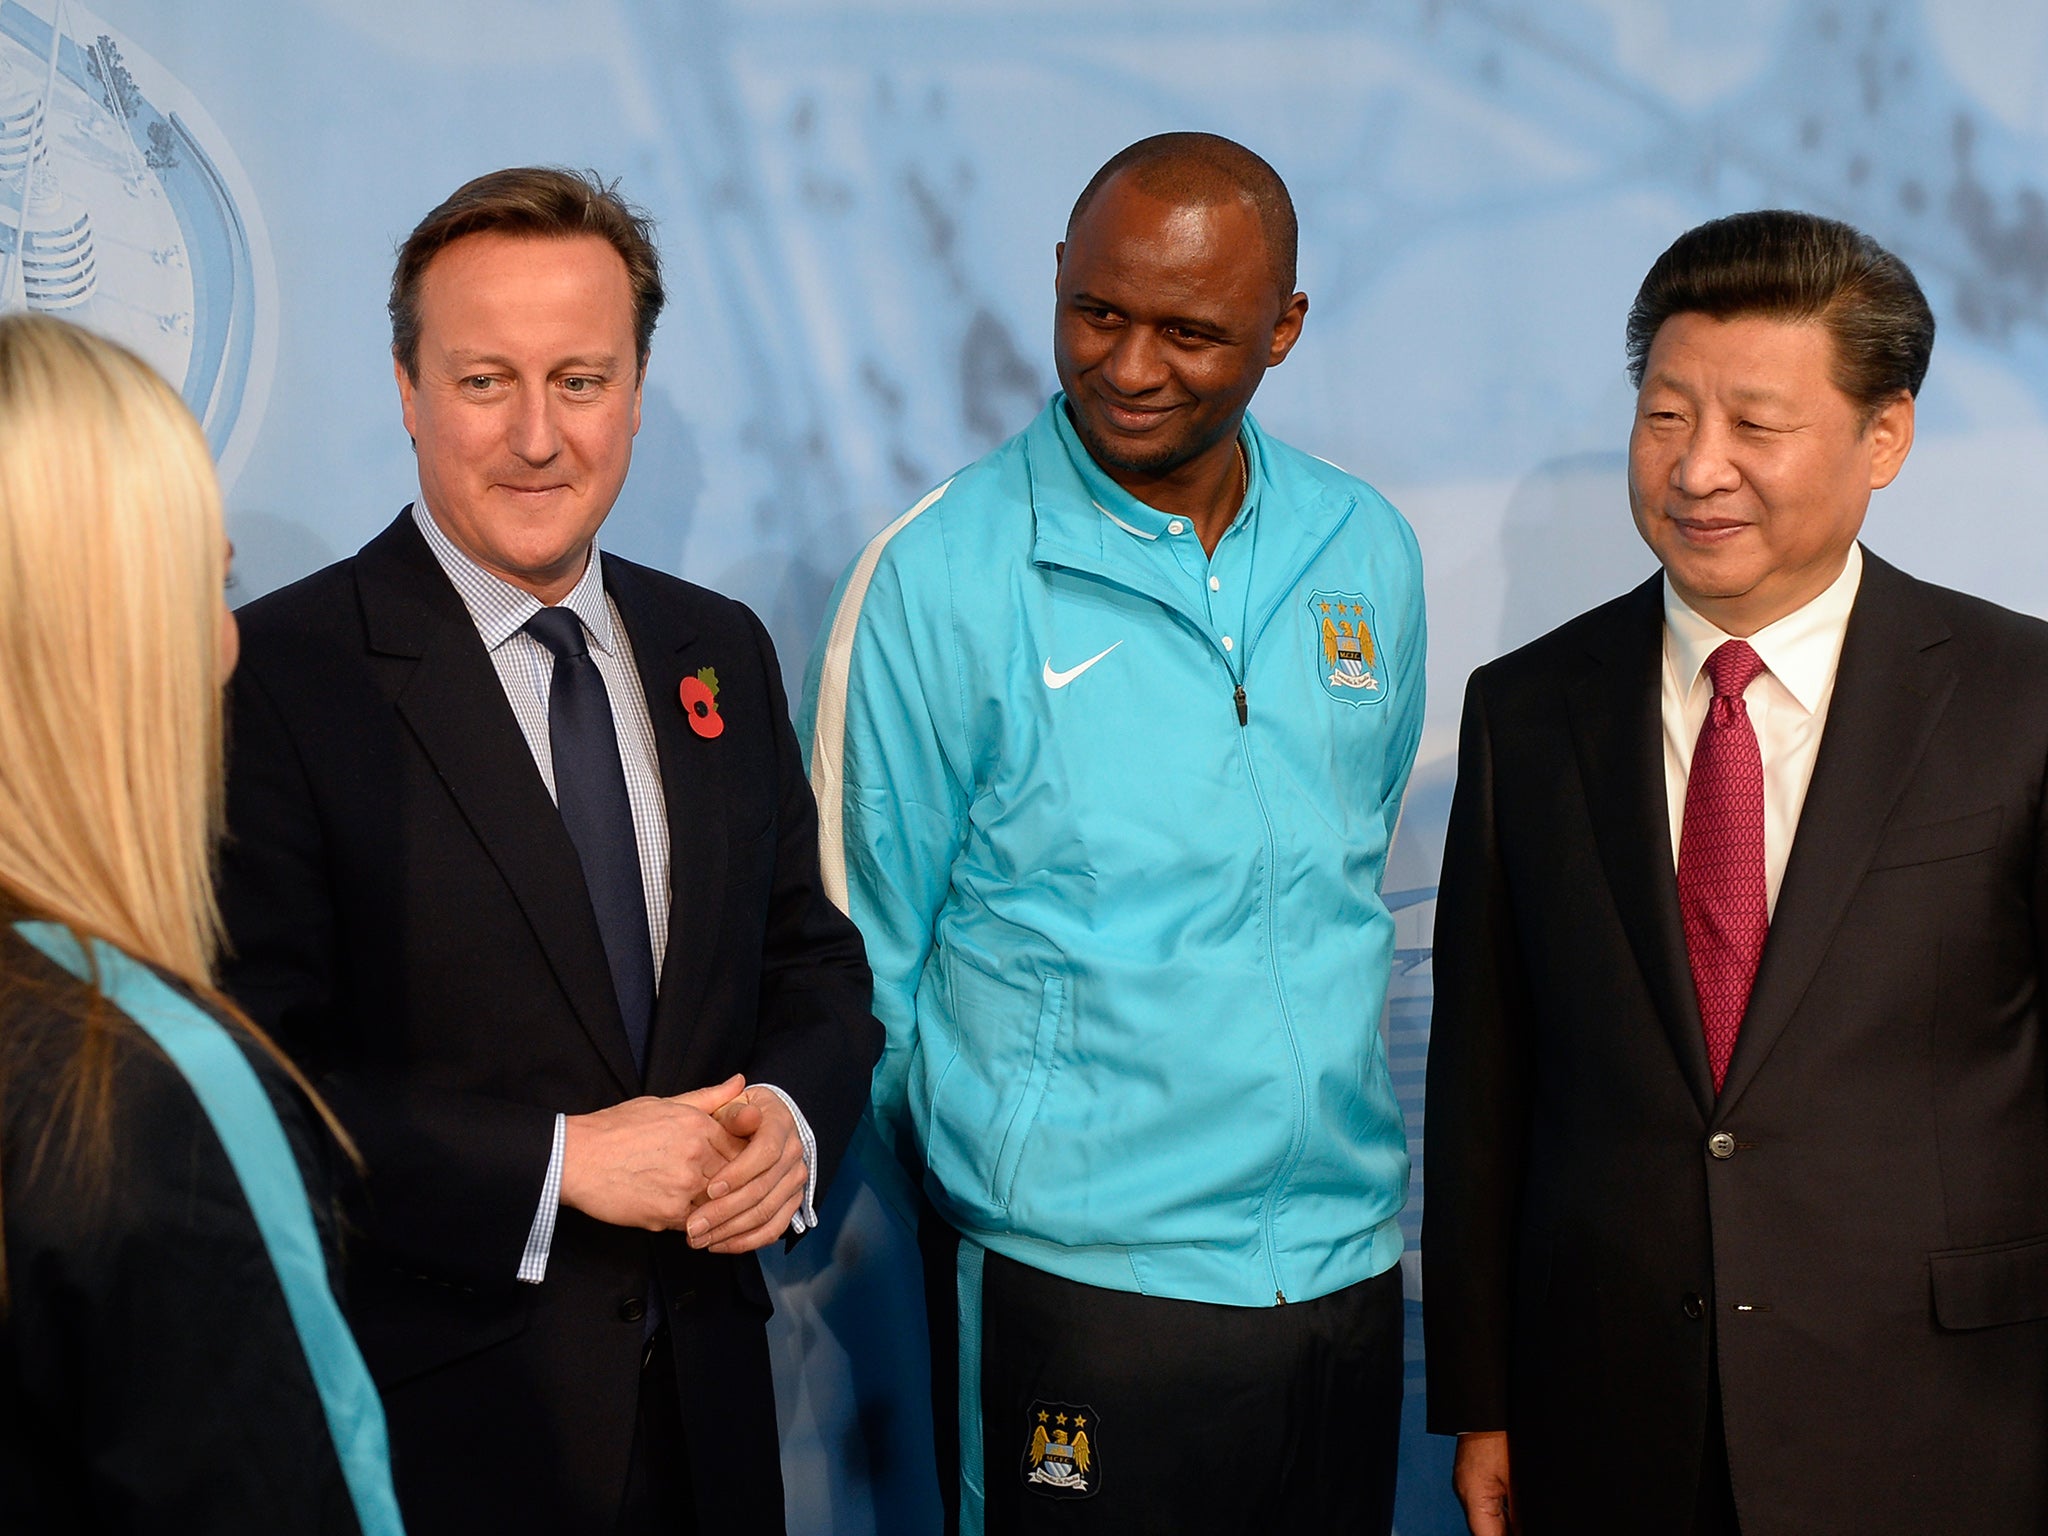 Patrick Vieira, formerly Manchester City's reserve team coach, and women's team striker Toni Duggan meet Prime Minister David Cameron and Chinese president Xi Jinping